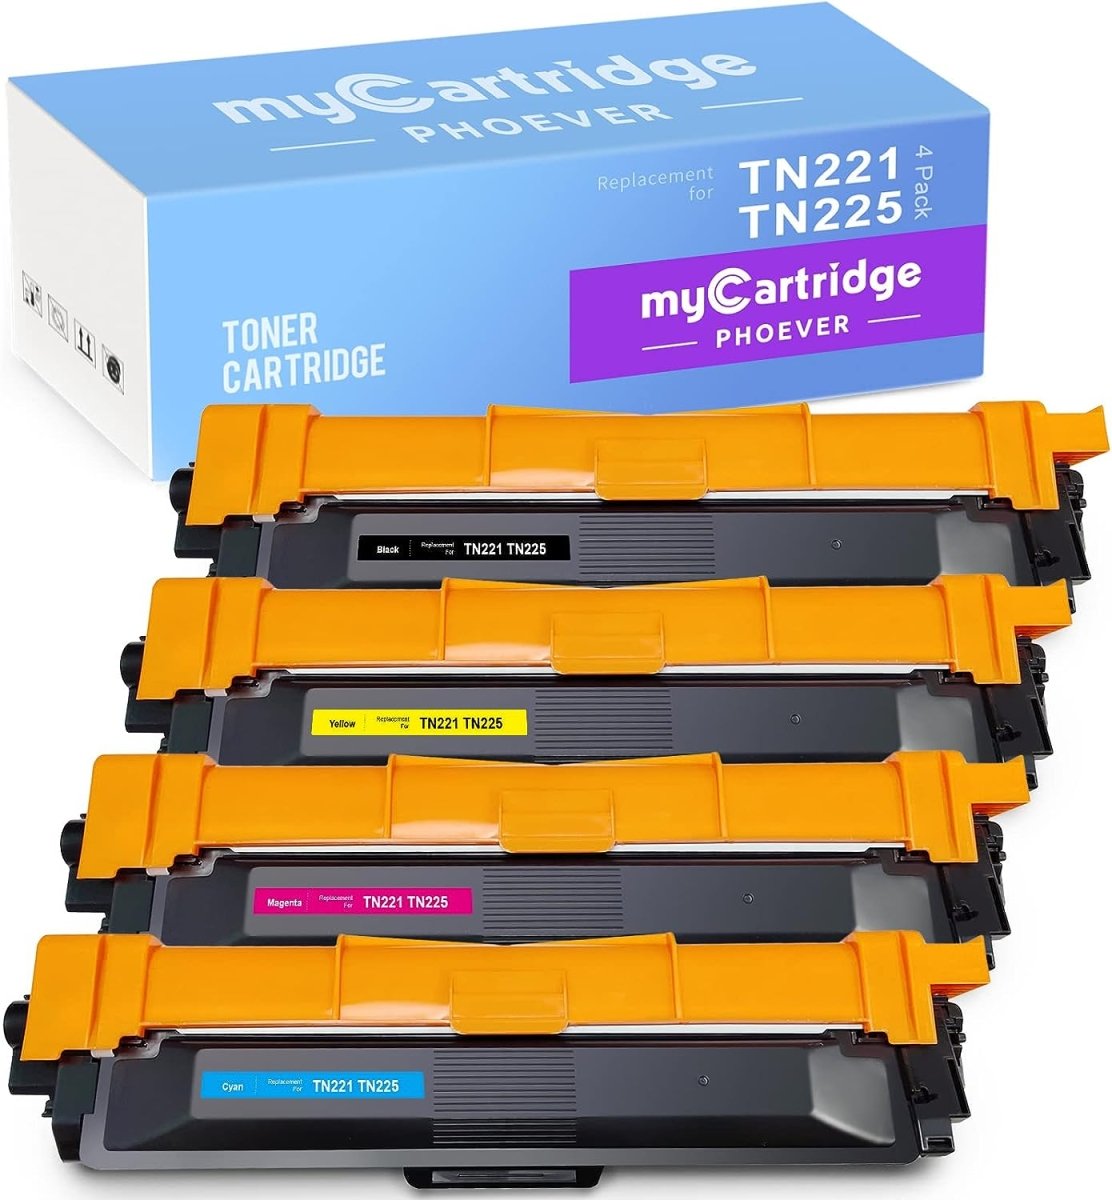 TN-225 Toner Cartridge Compatible with Brother Printer(Black, Cyan, Magenta, Yellow) 4-PK - Linford Office:Printer Ink & Toner Cartridge